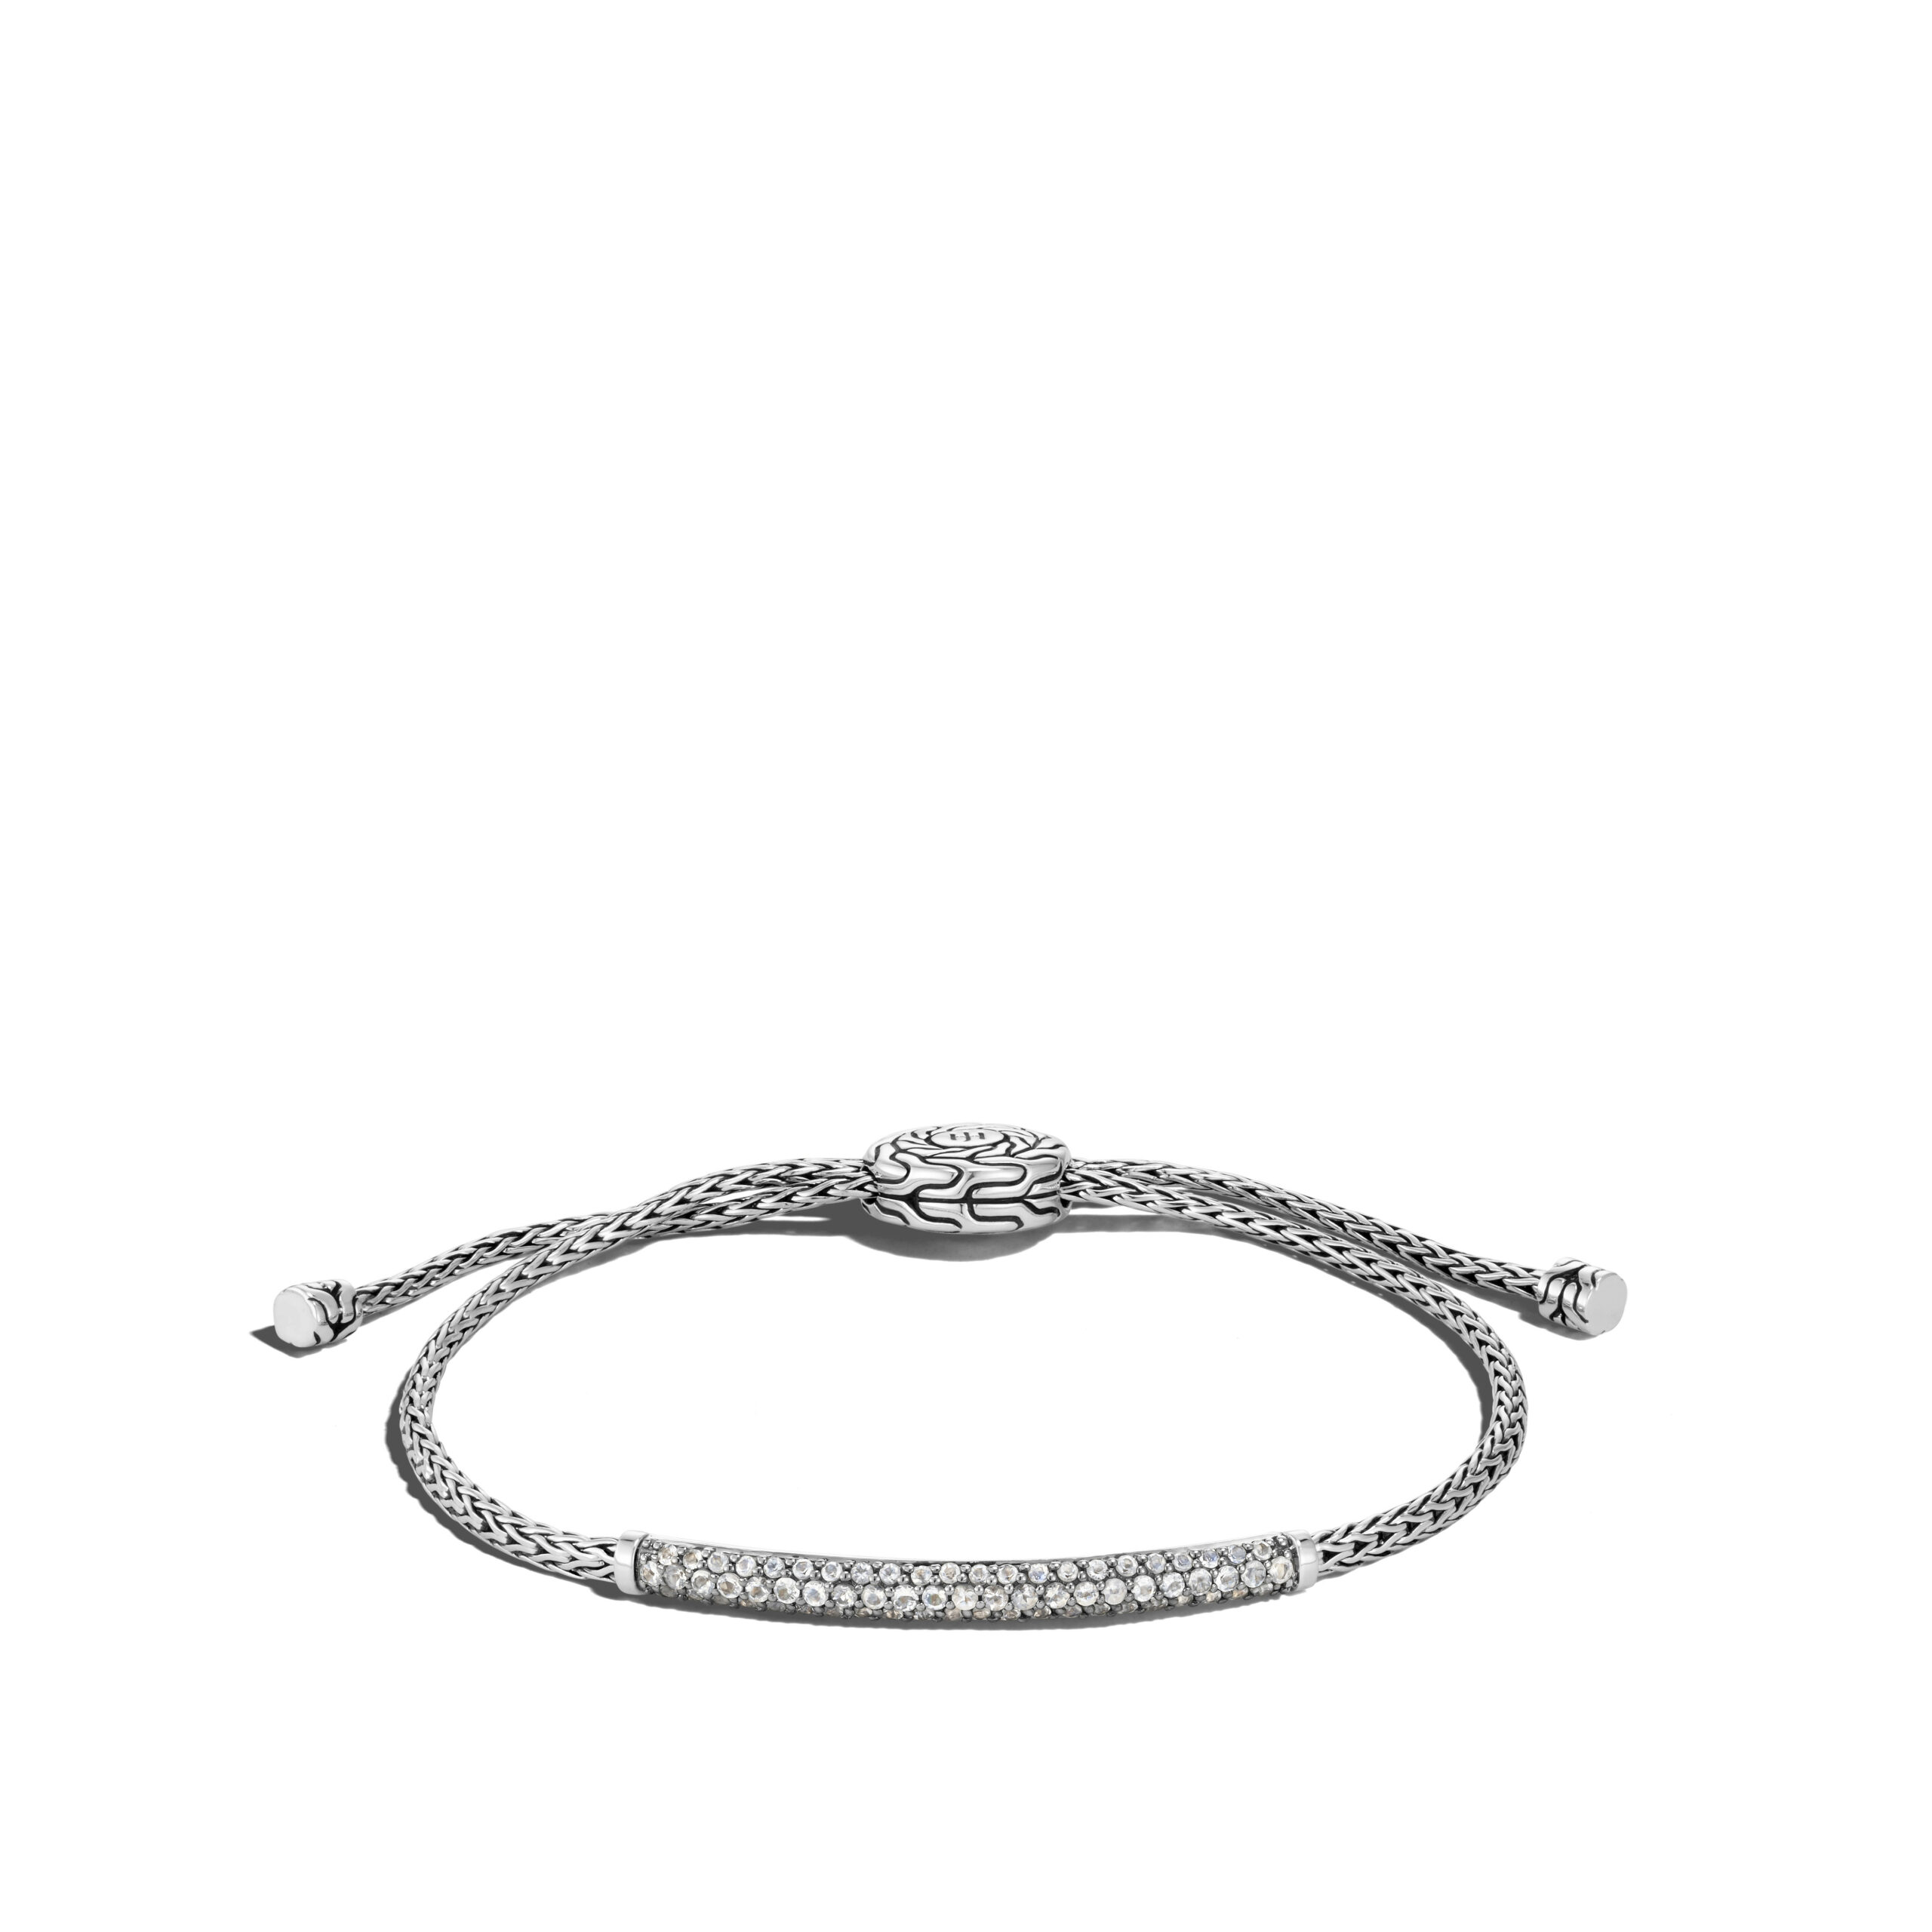 This bracelet by John Hardy is crafted from sterling silver and features moon stone.